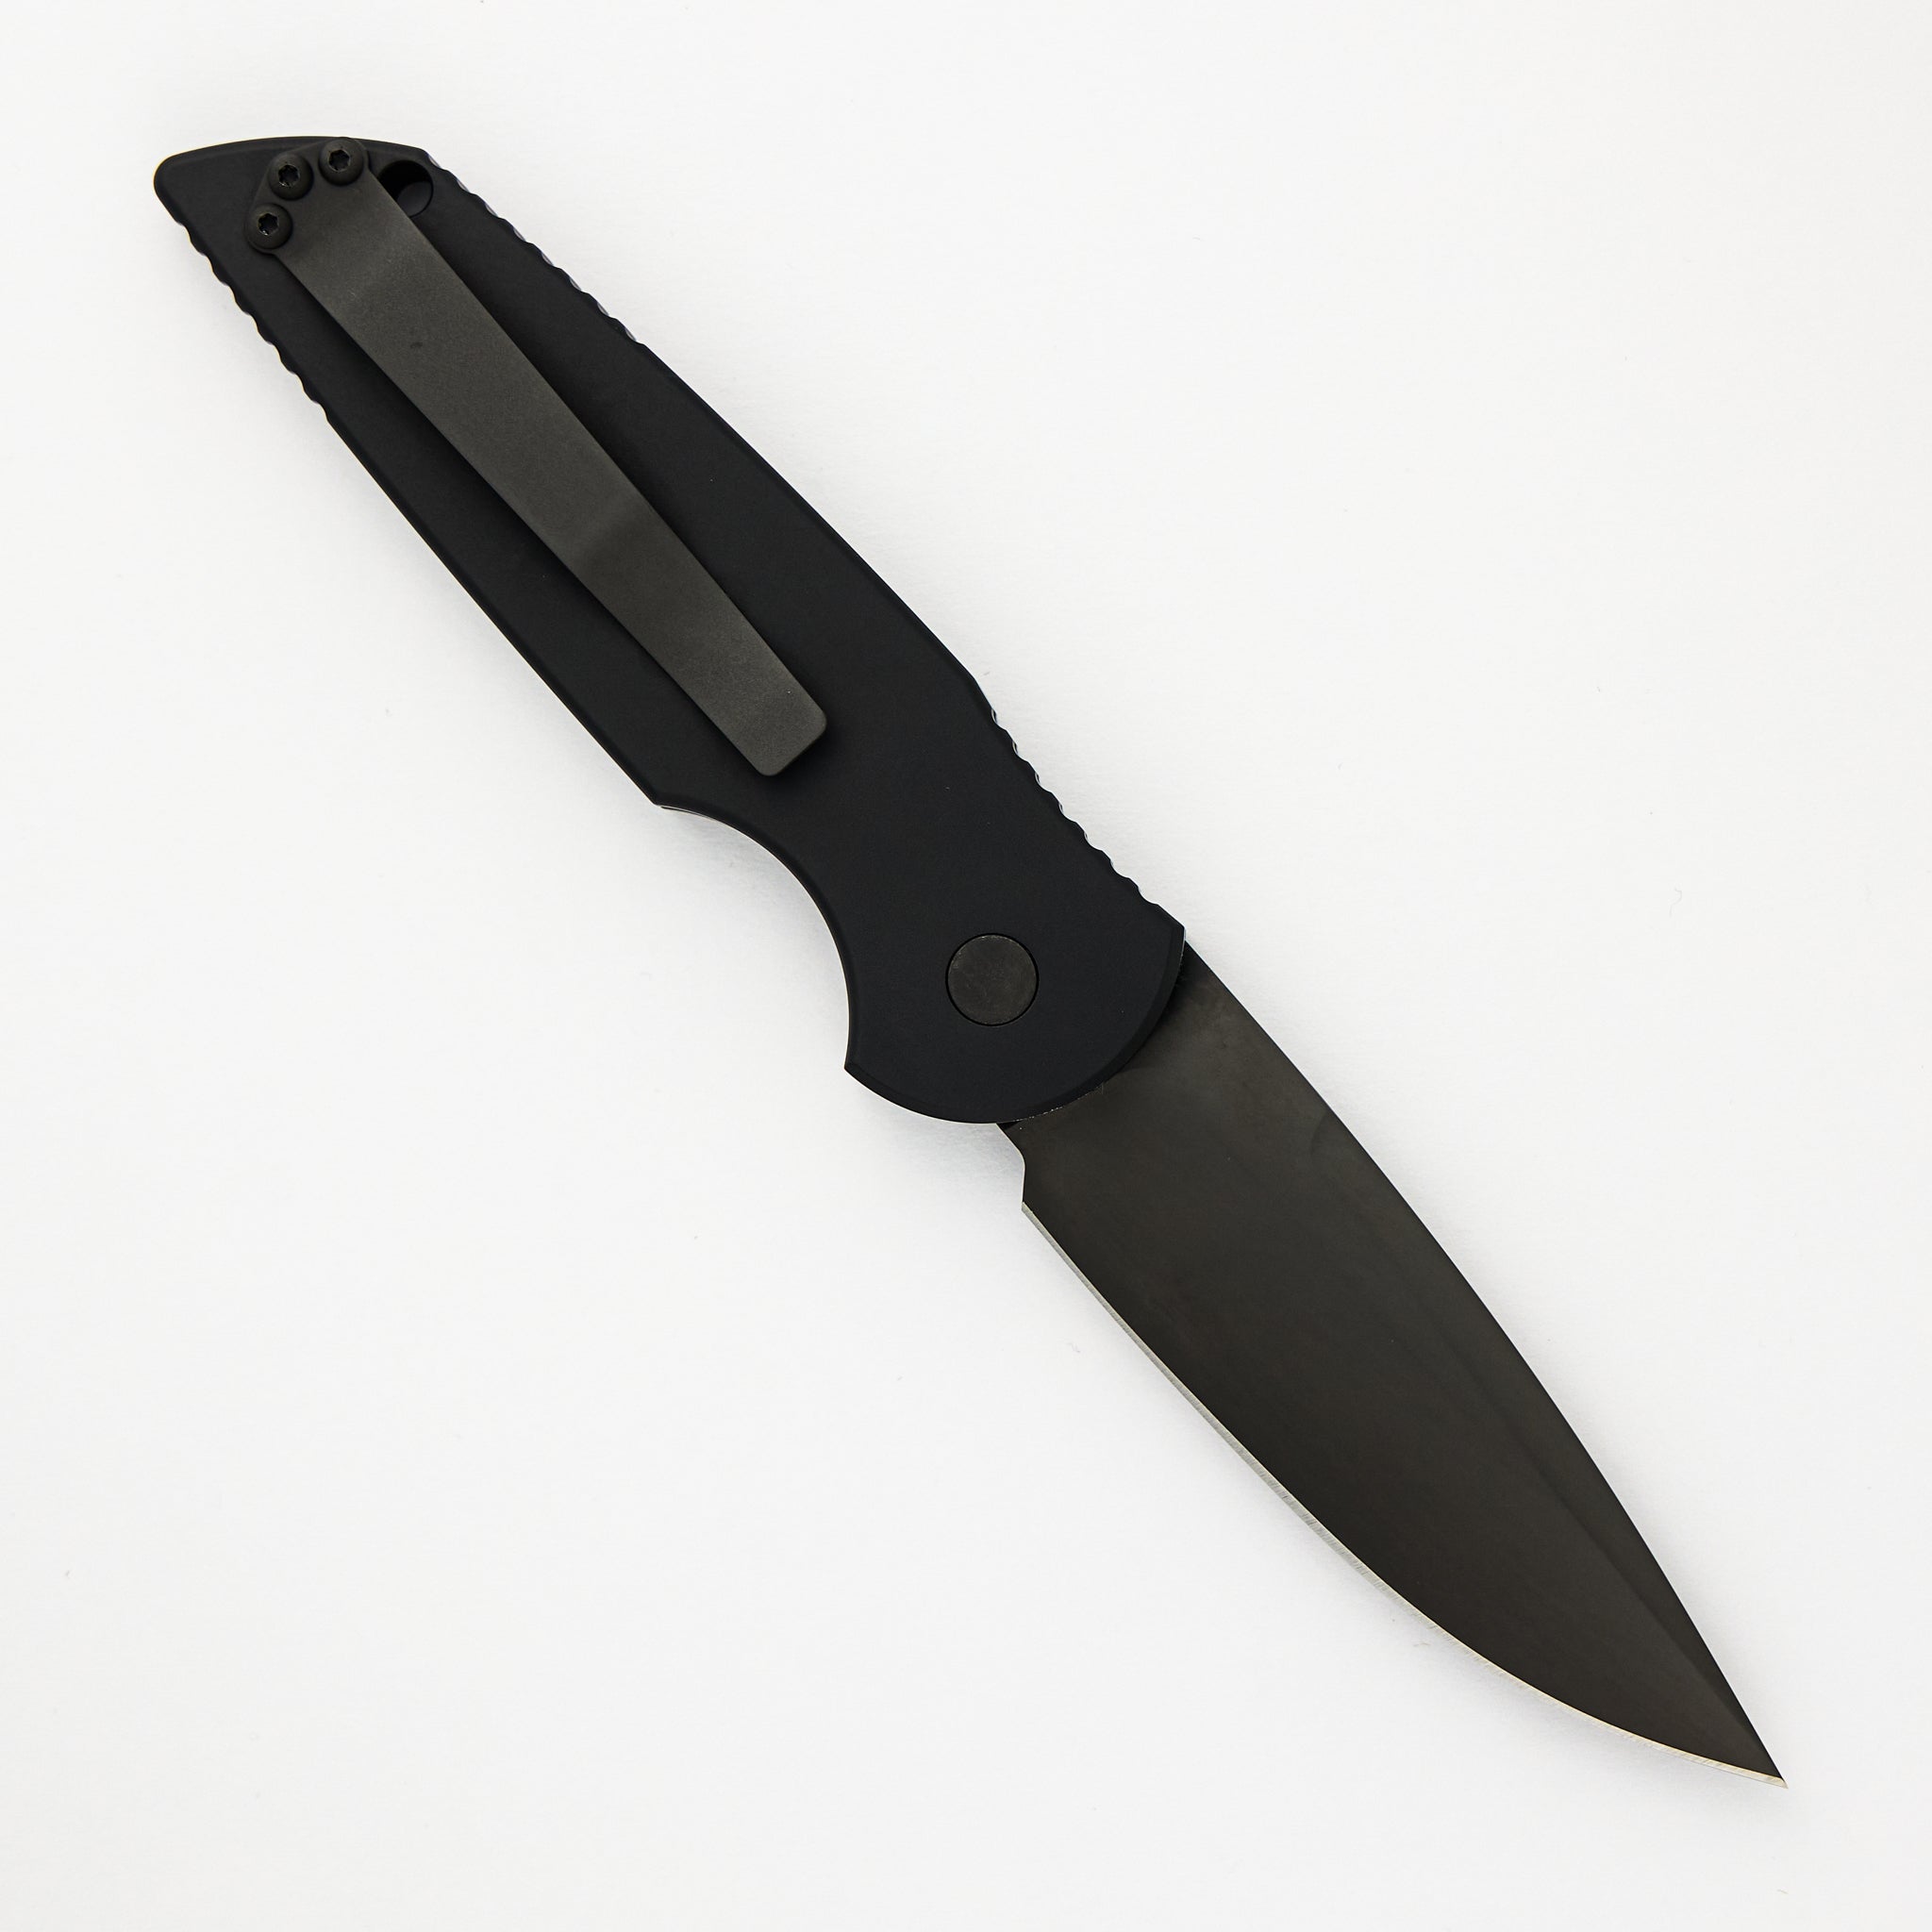 Pro-Tech Knives Tactical Response 3 Auto - Black Handle With Grooves - Tritium Push Button - Black Blade - Black Hardware TR3-SWAT-OPERATOR